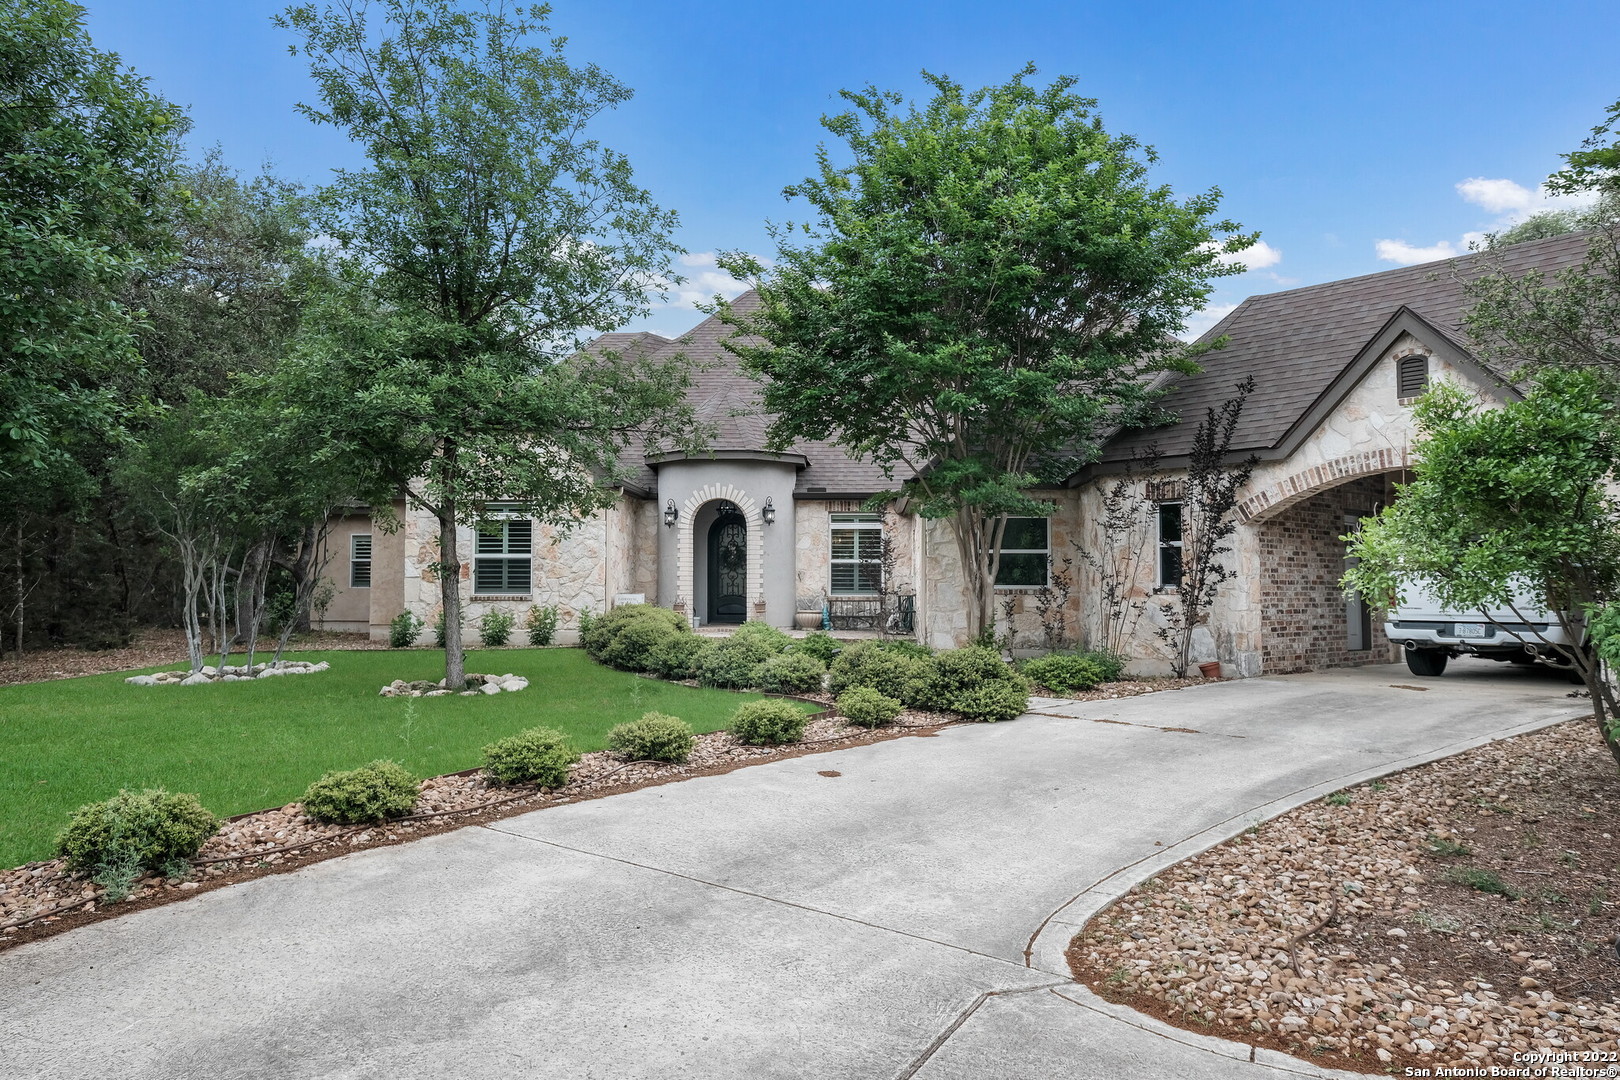 Charming French Country Home in Century Oaks Estates. This Large Custom Home has 3 Bedrooms with 3 1/2 Bathrooms. Features include Stone and Marble Counter Tops, Custom Cabinetry, Foam Insulation, 3 Car Garage, Central Vacuum, Large Backyard with Beautiful Mature Trees, Heated In-Ground Pool and Spa with Outdoor Kitchen as well as a Tesla charger.  Most Furnishings are Negotiable. Great Location and Minutes to the J.W Marriott. A Wonderful Entertainment Home. Offers due Thursday May 5th at 5:00 p.m.